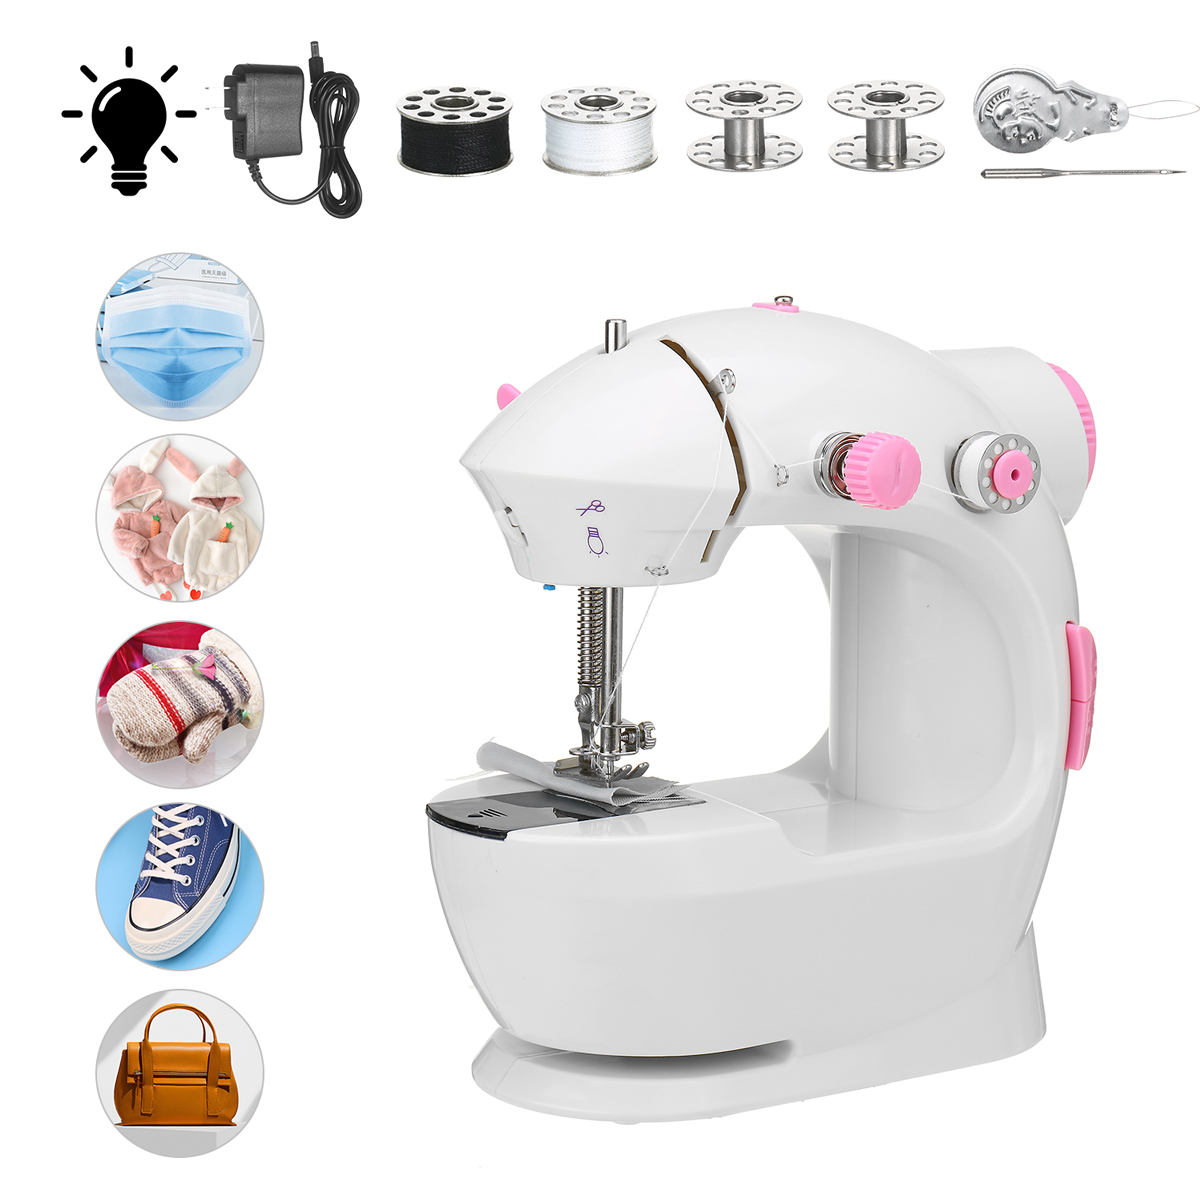 Household-Electric-Sewing-Machine-Mini-Portable-Speed-Adjustable-Sewing-Machine-1725564-2